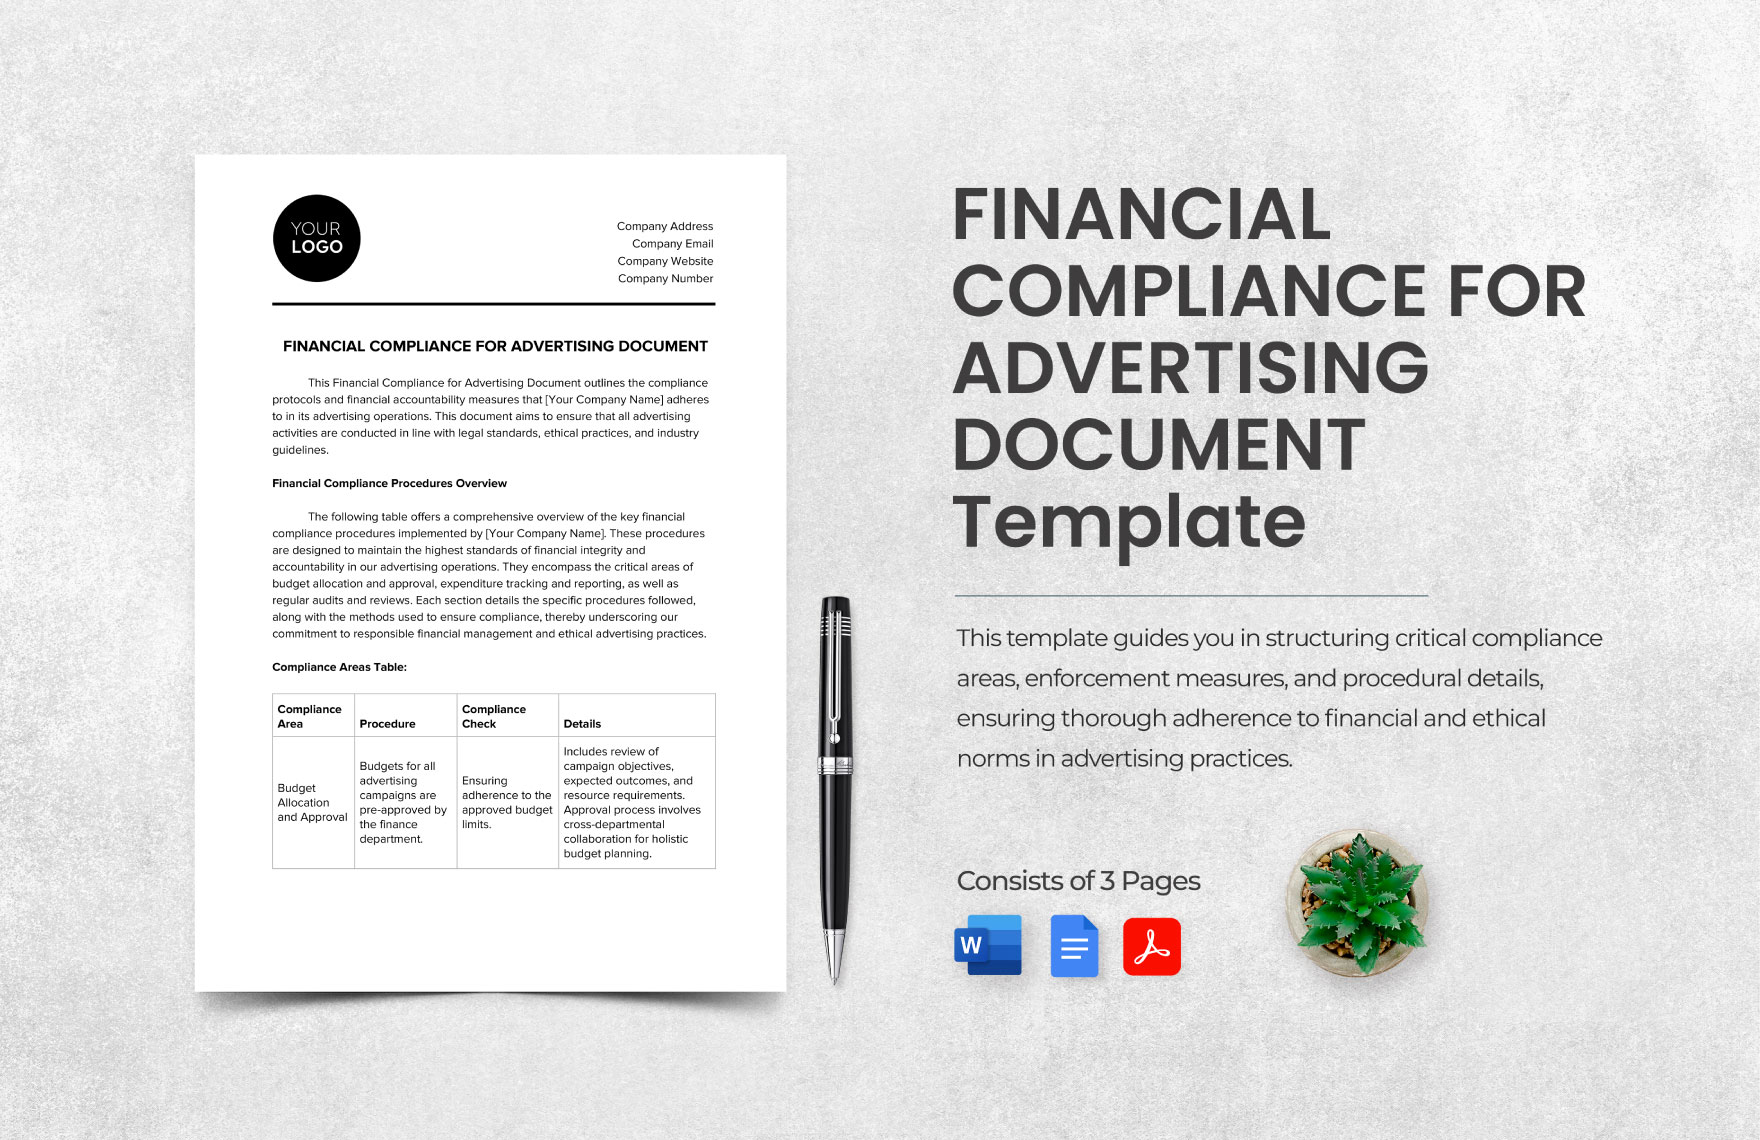 Financial Compliance for Advertising Document Template in Word, Google Docs, PDF